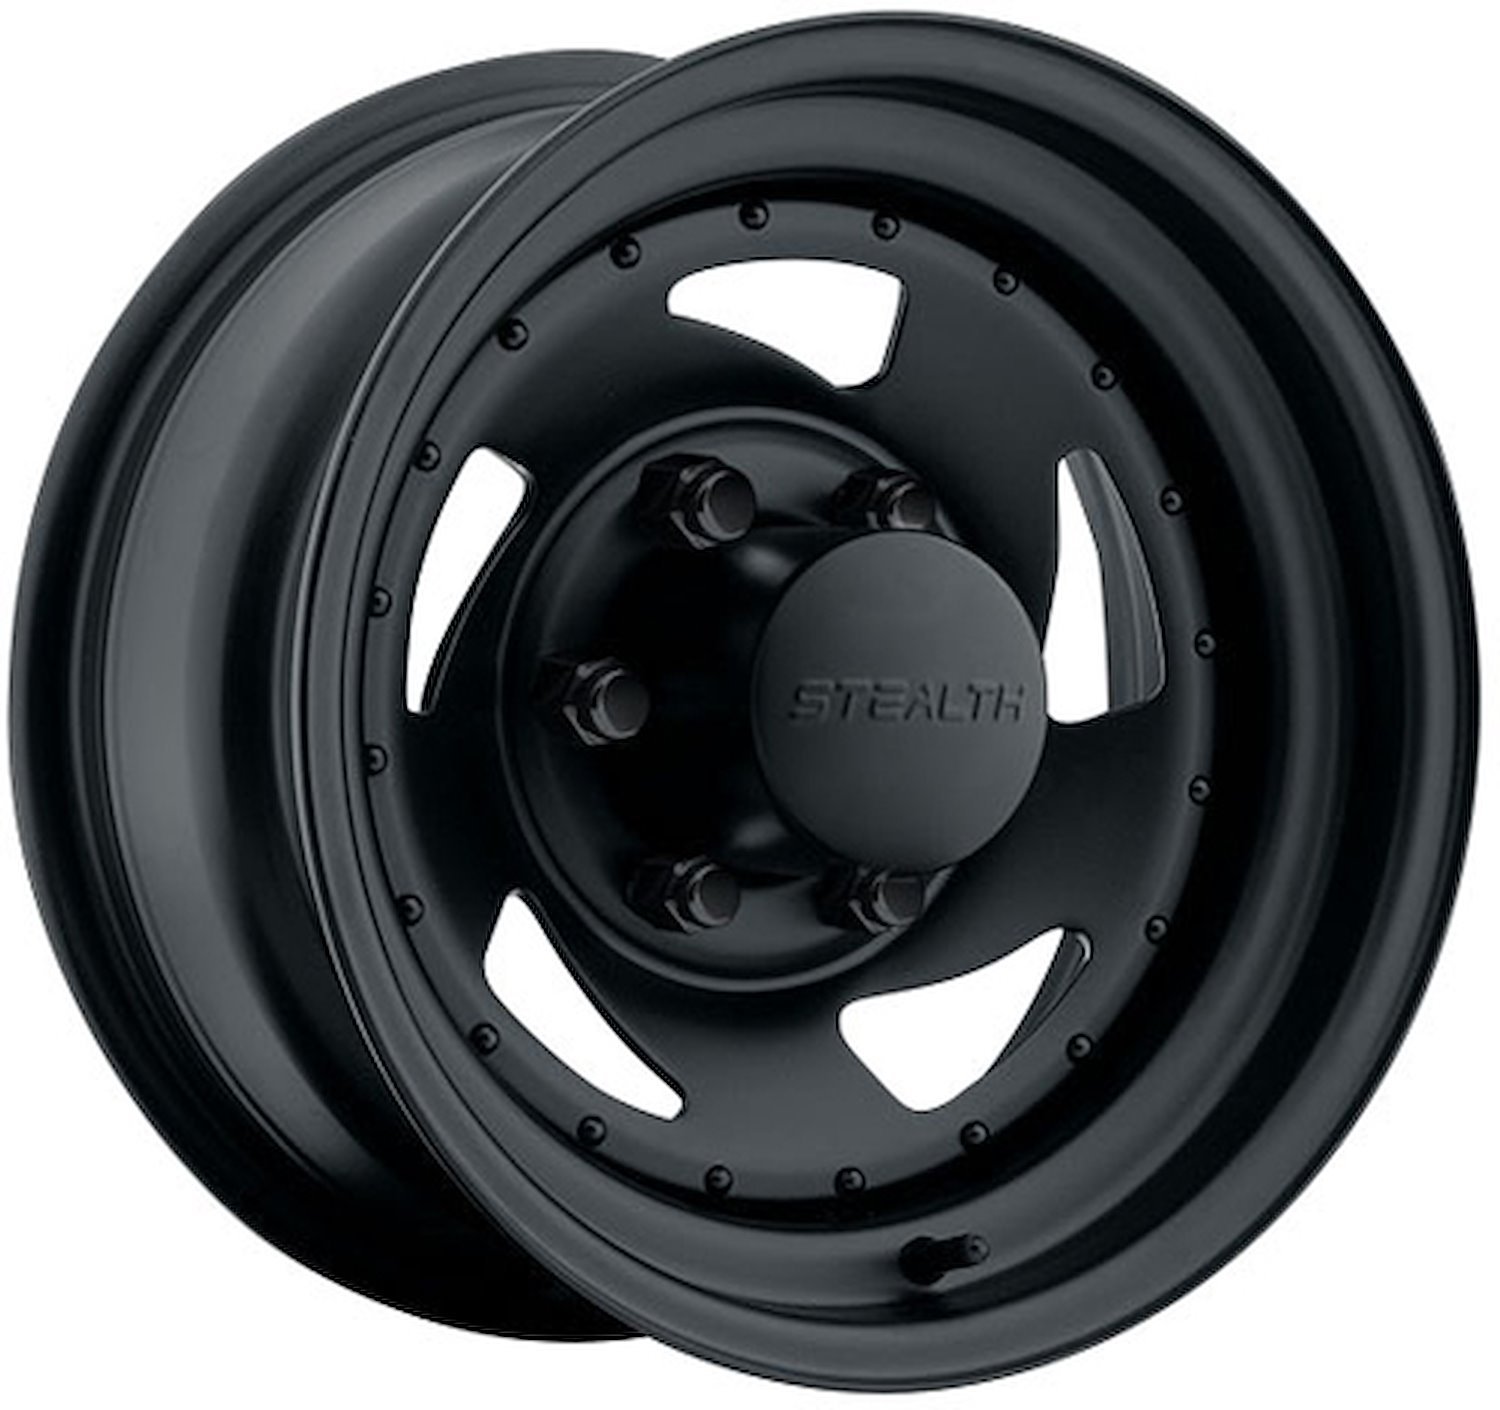 STEALTH BLACK BLADE 15 x 8 5 x 45 Bolt Circle 475 Back Spacing +6 offset 33 Center Bore 1500 lbs Load Rating